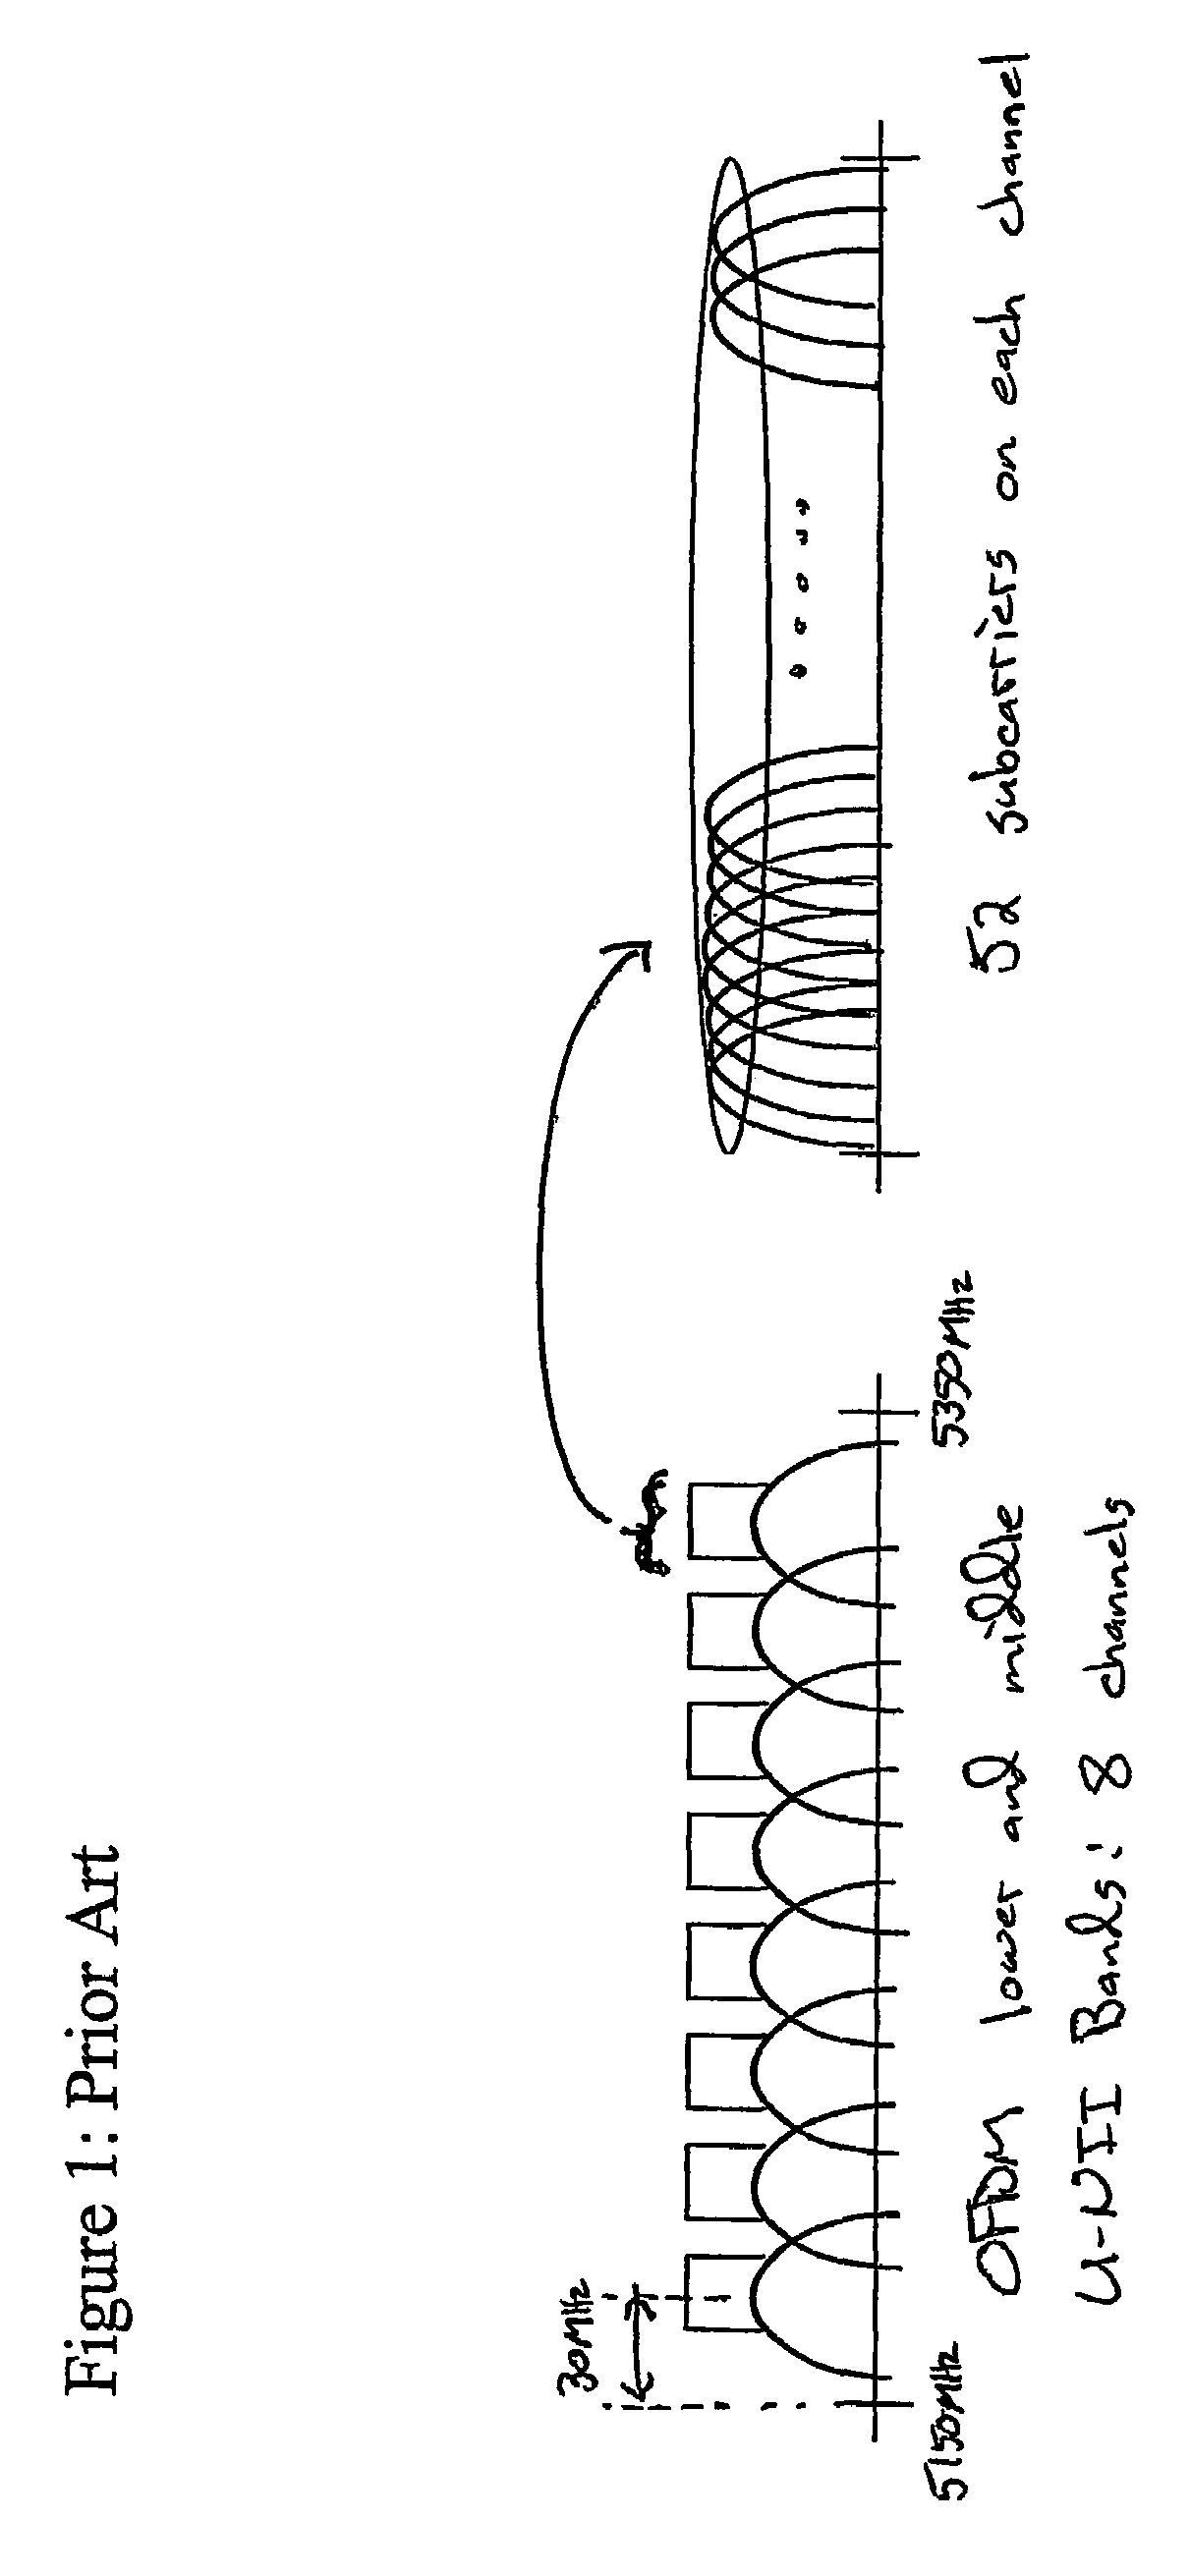 Method and apparatus for discrete power synthesis of multicarrier signals with constant envelope power amplifiers